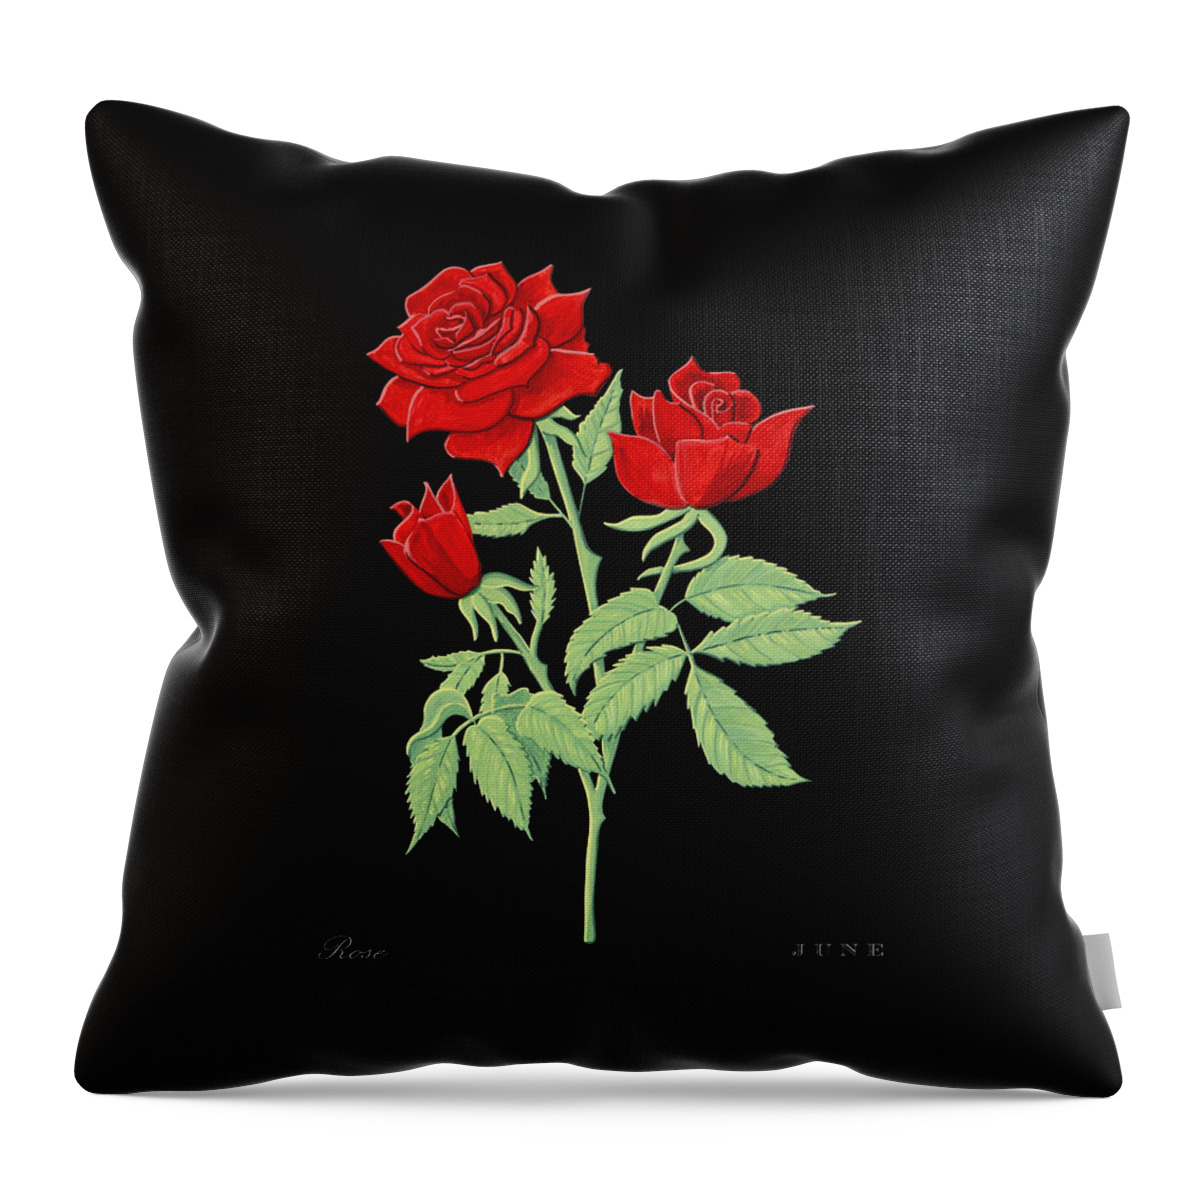 Rose Throw Pillow featuring the painting Rose June Birth Month Flower Botanical Print on Black - Art by Jen Montgomery by Jen Montgomery